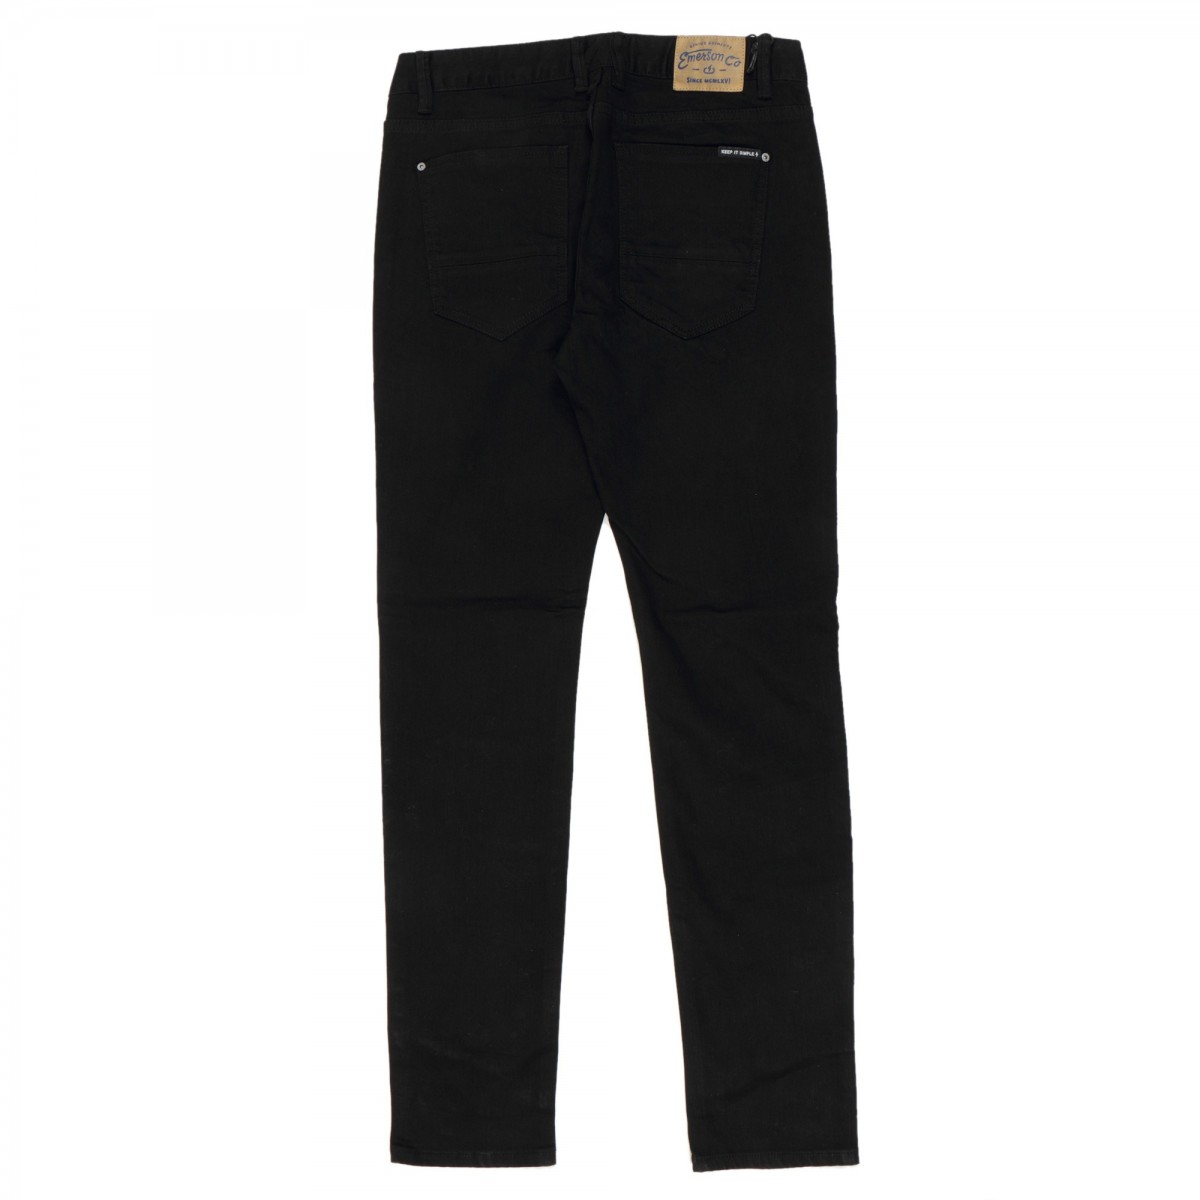 MENS STRETCHED DEMIN PANTS